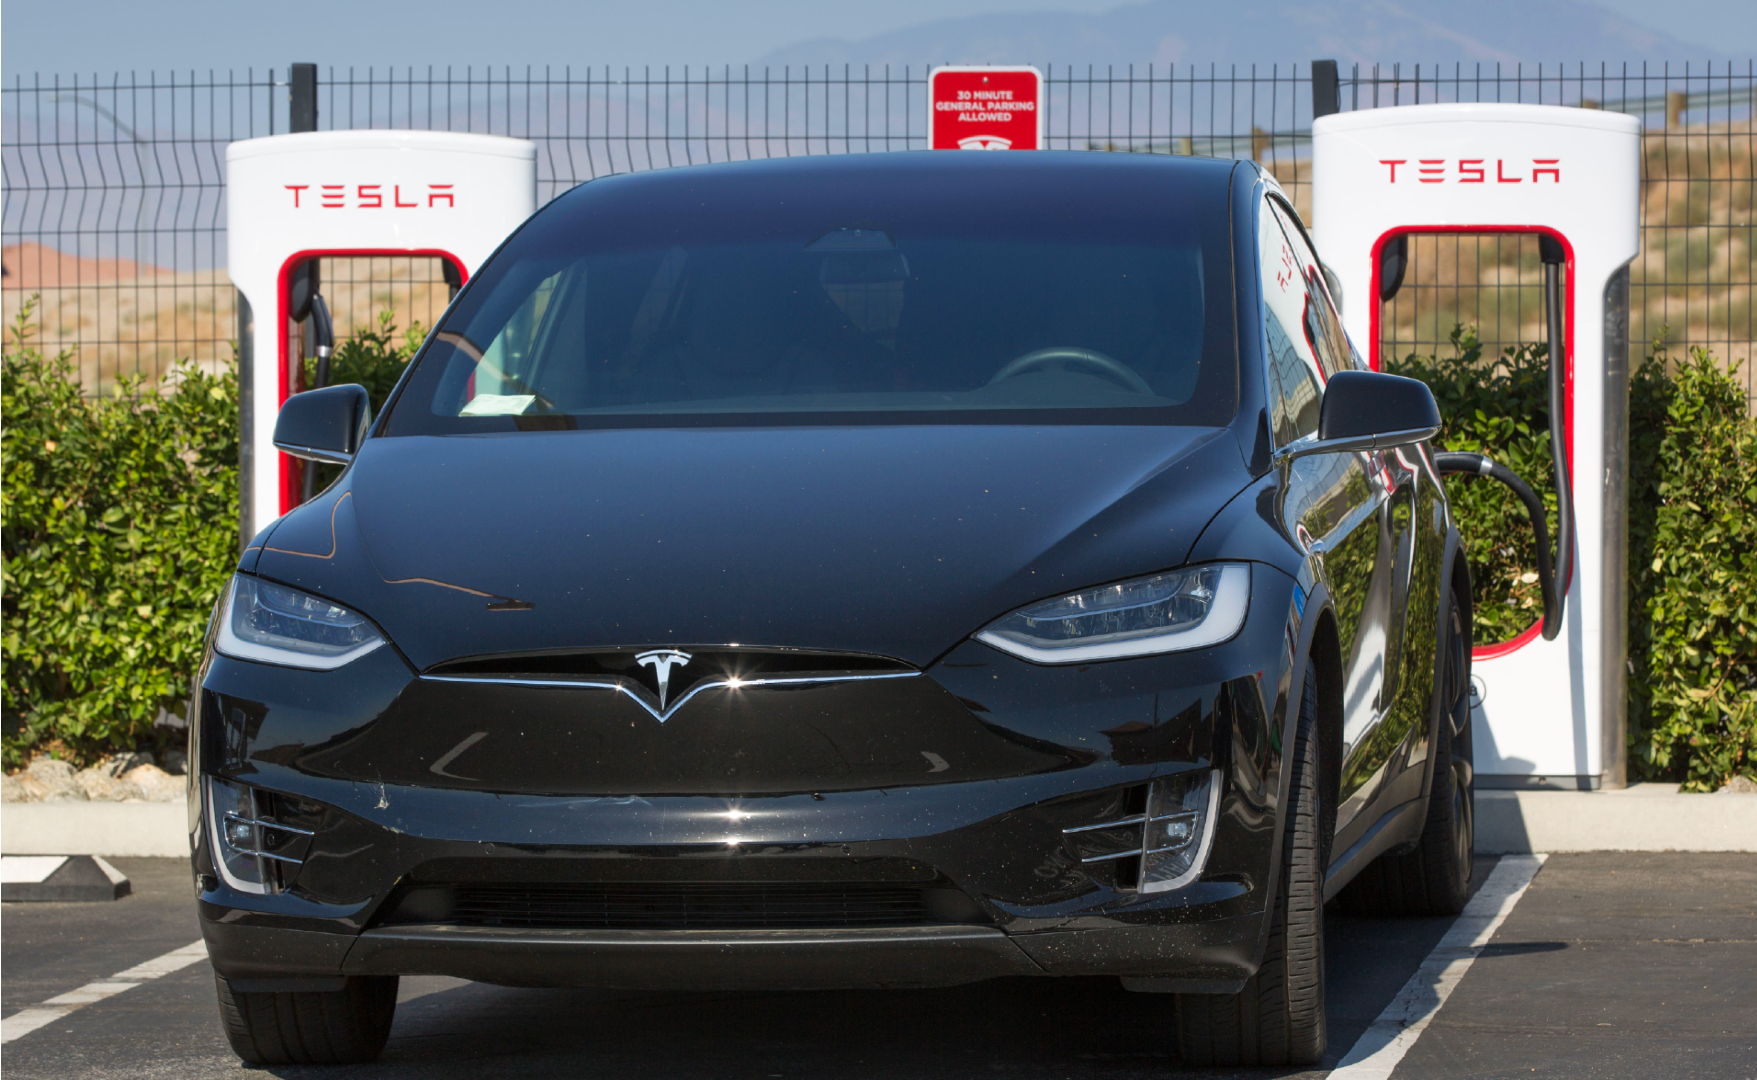 A Tesla electric vehicle supercharging station near the Tejon Ranch Outlet Stores in the Tehachapi Mountains, adjacent to Interstate 5, is viewed on July 7, 2021, near Lebec, California.